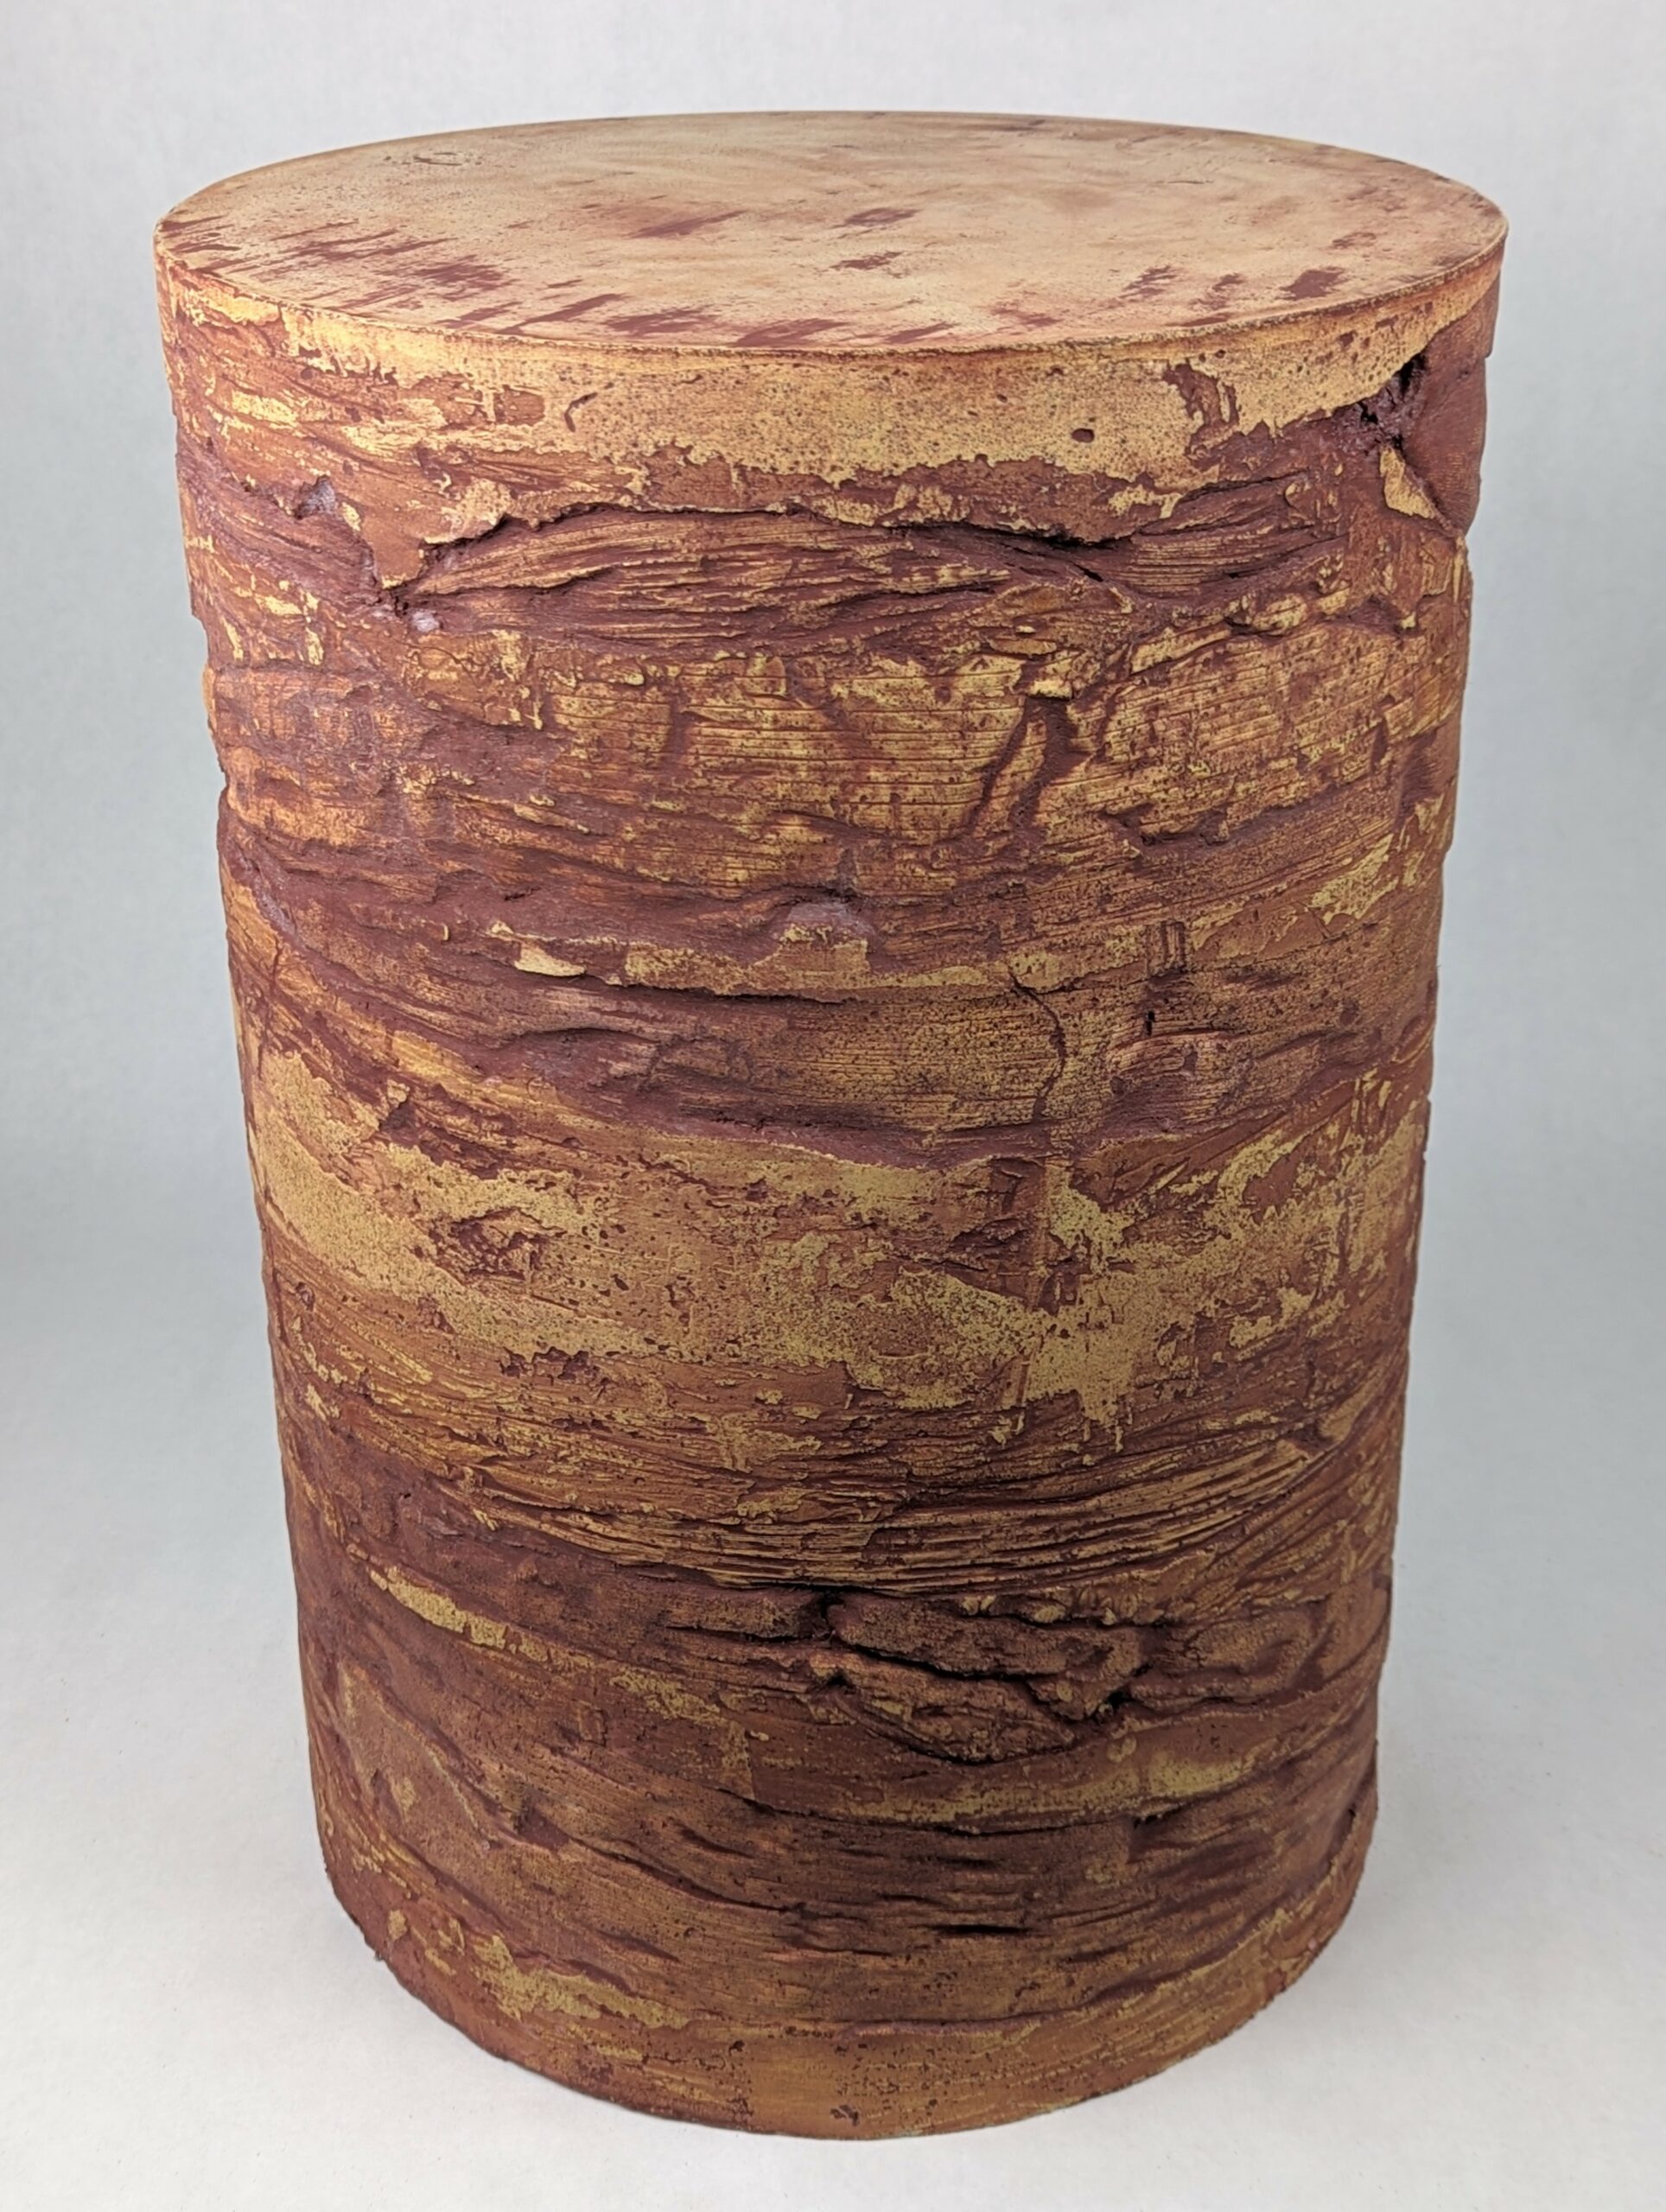 Caput Mortuum: yellowish concrete side table with caput mortuum colored fill in rustic palm leaf impressions, 14" diameter x 20" tall